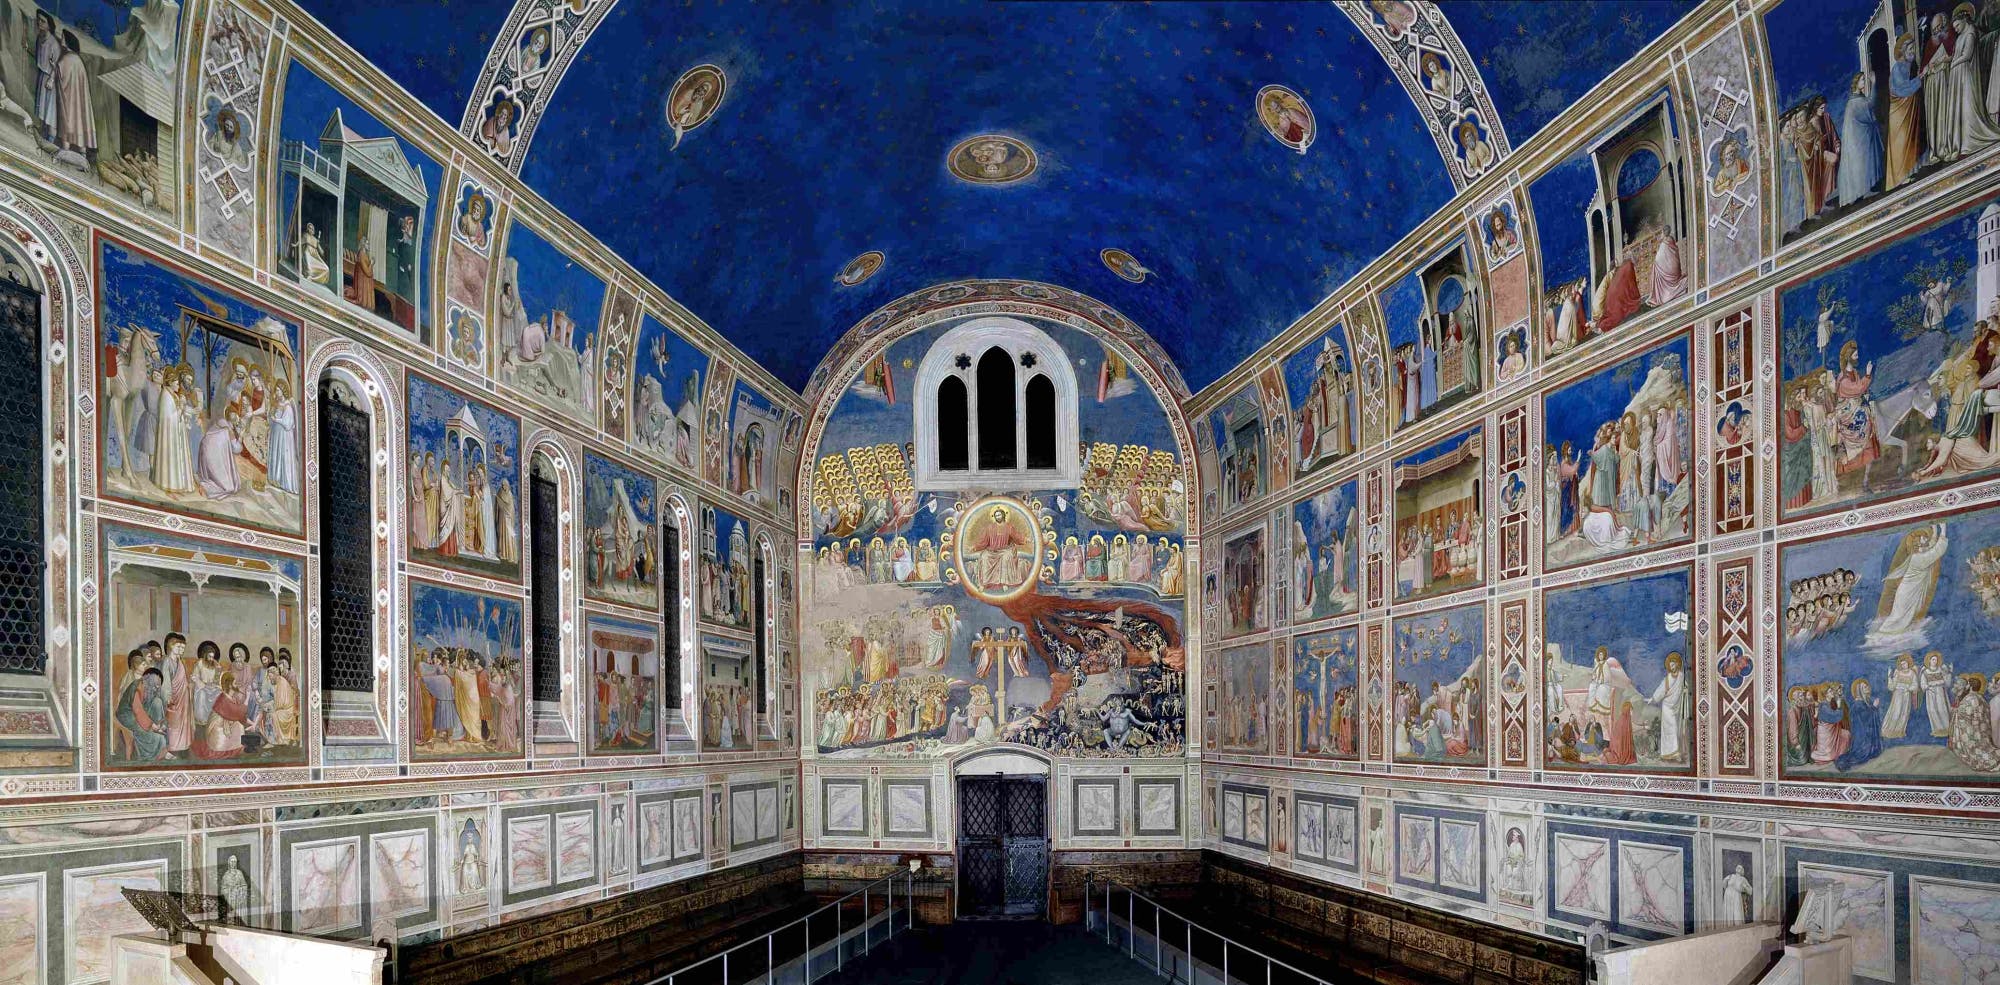 Private walking tour of Padua with the Scrovegni Chapel